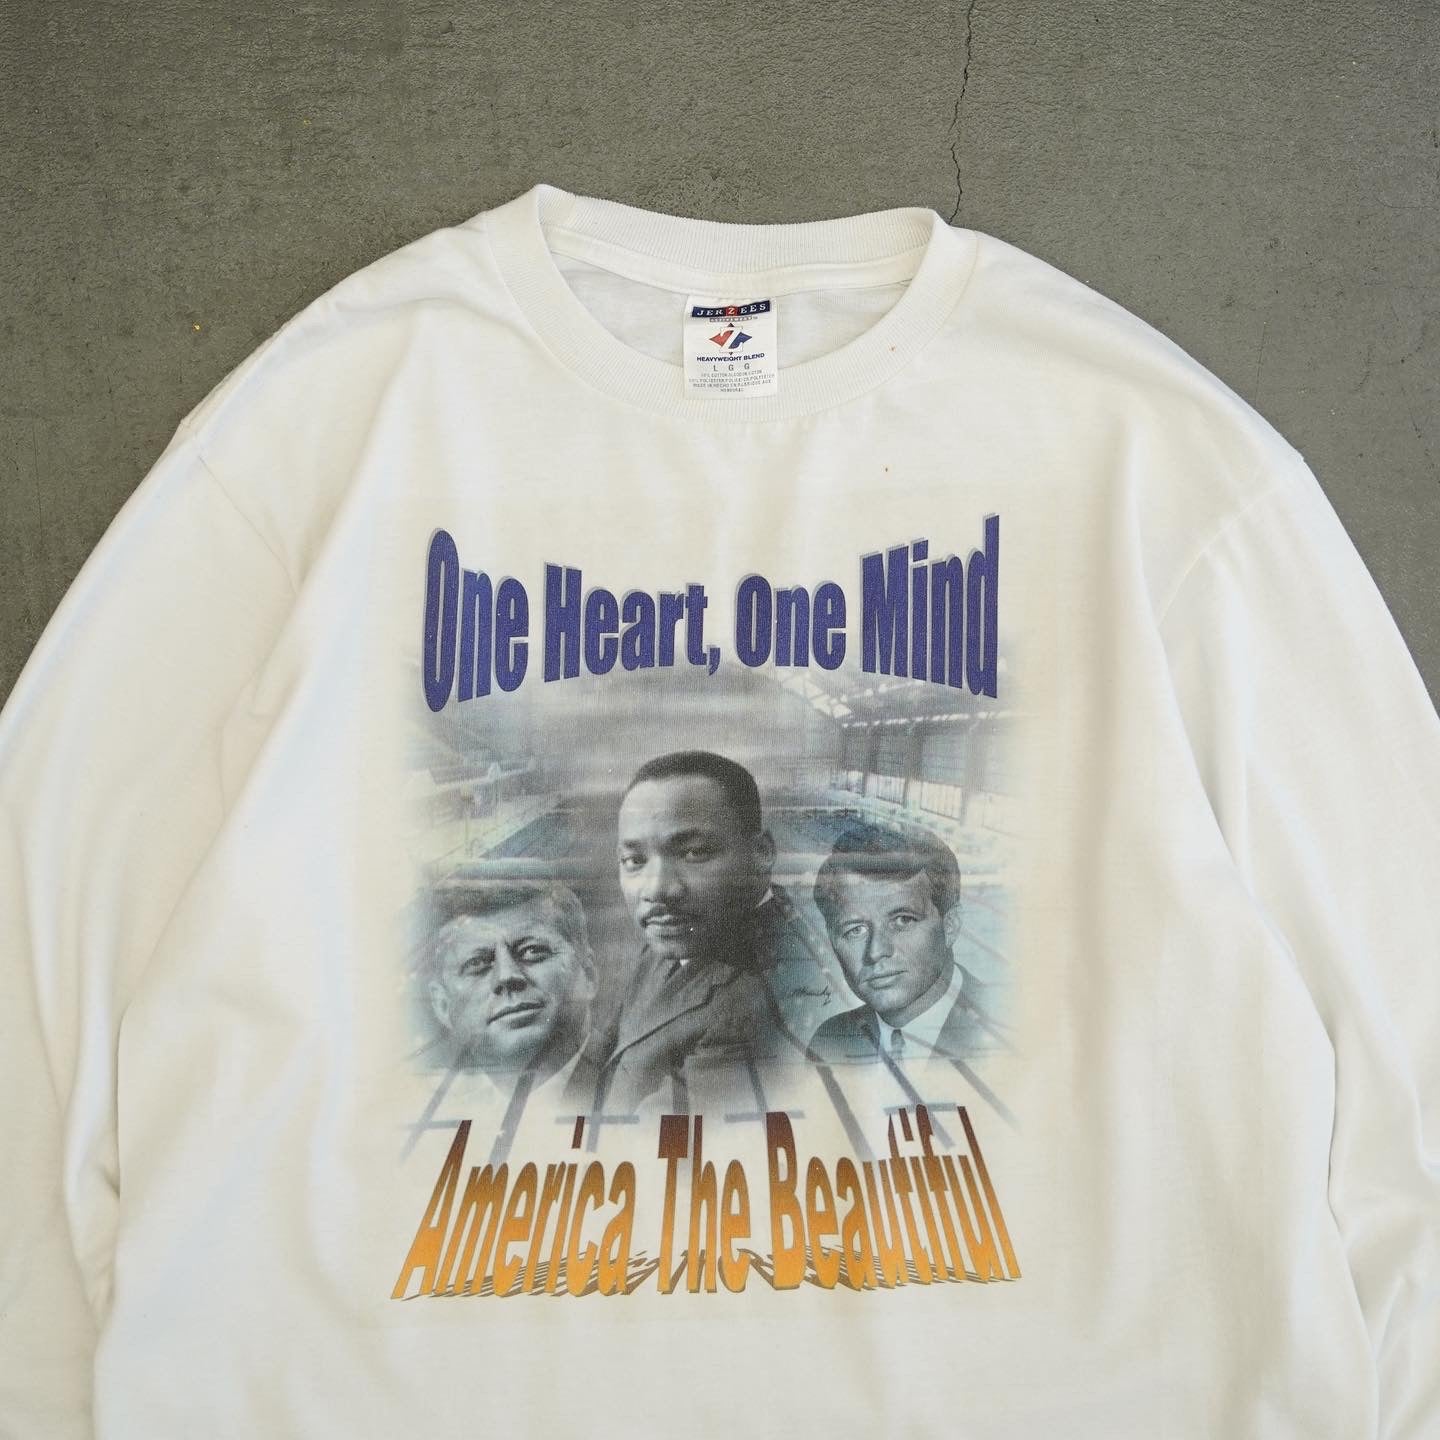 Dr. Martin Luther King Jr. Swim Classic 2004 L/S Tee